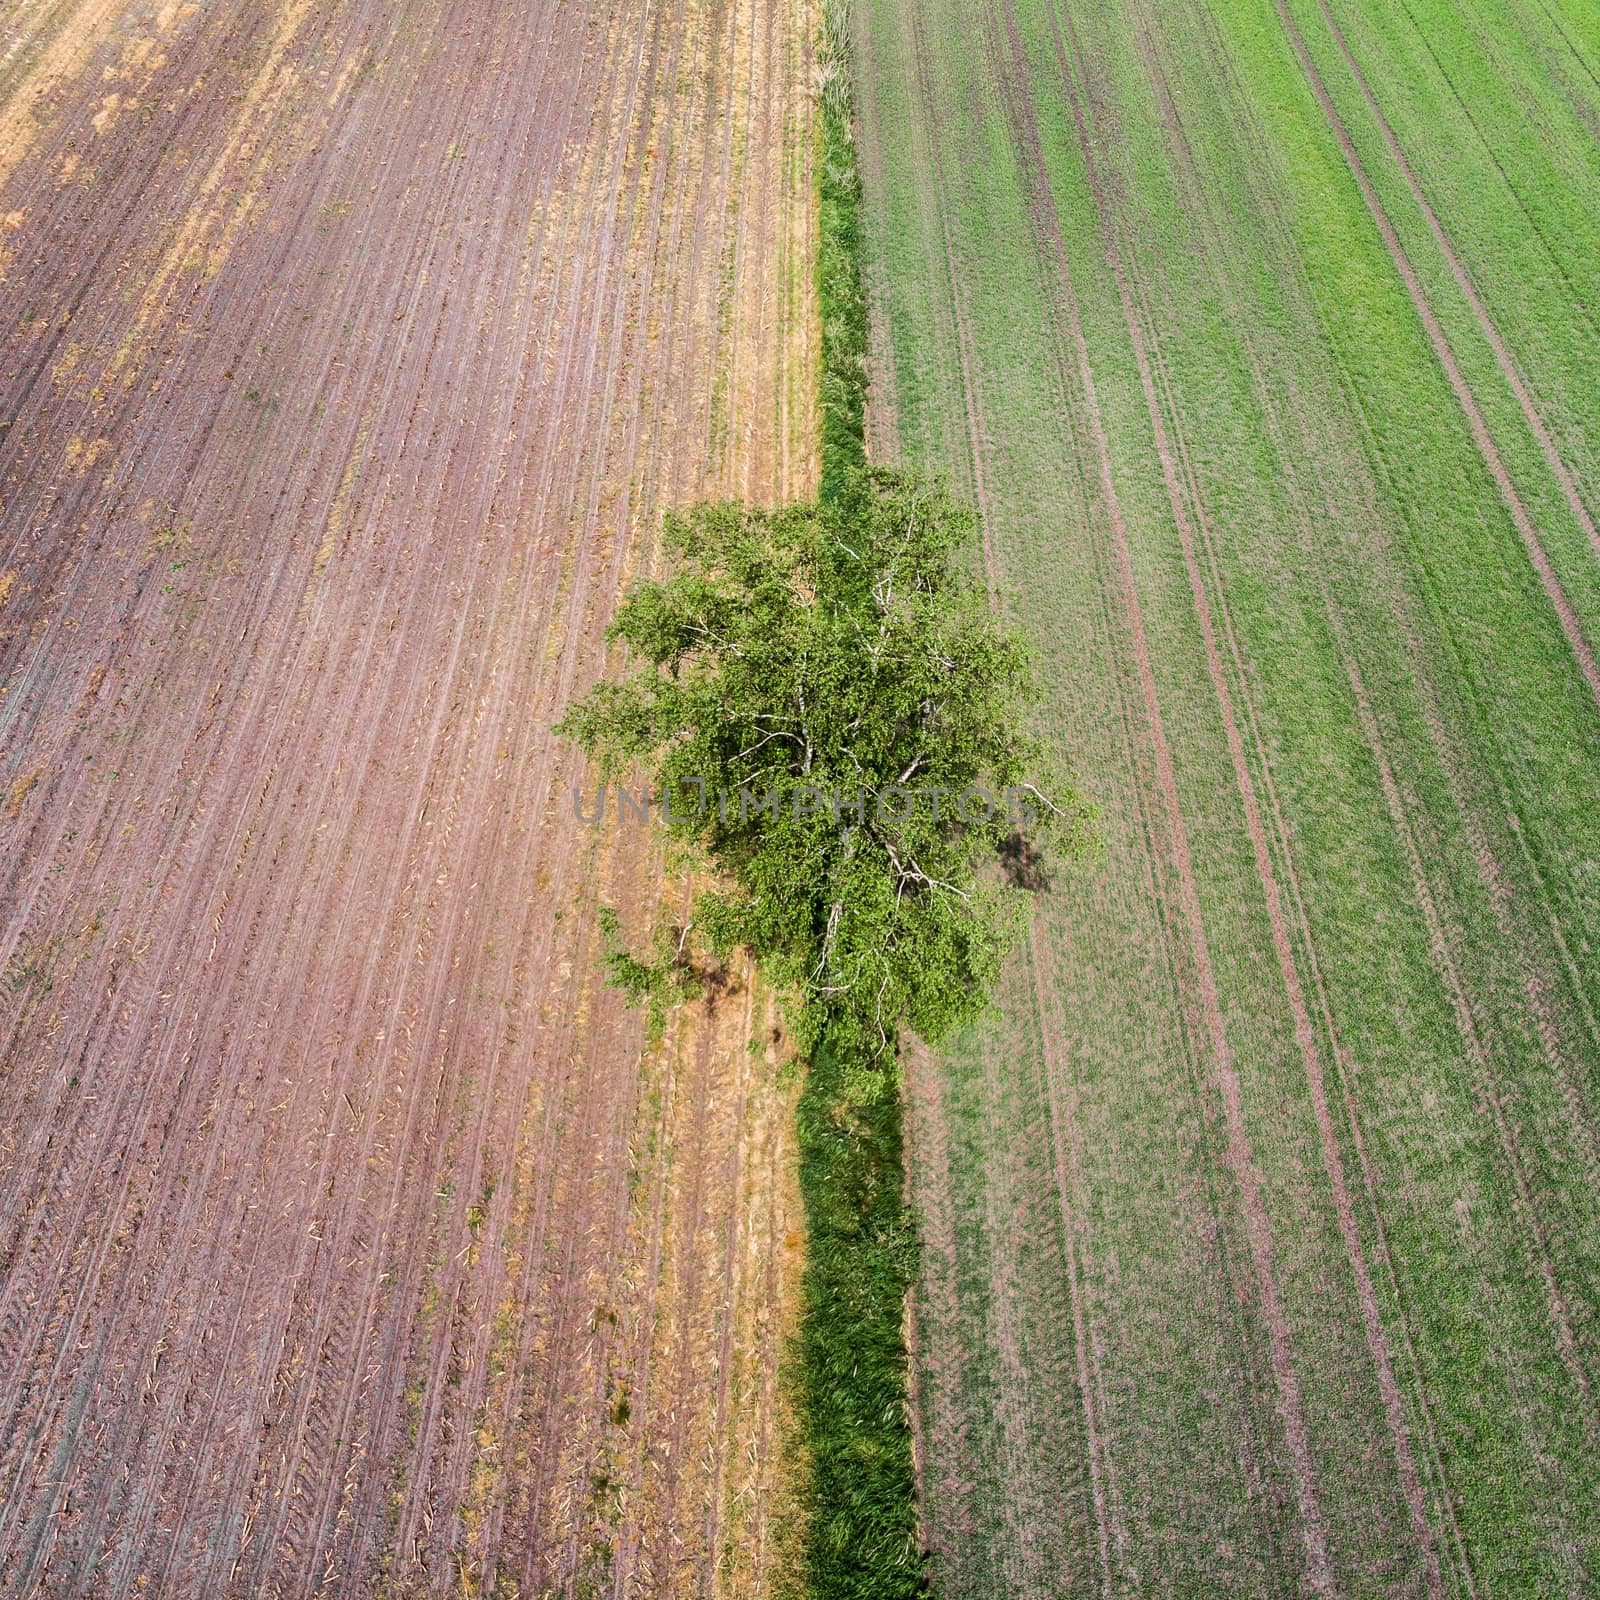 Aerial view of a single tree taken at an angle from a great height at the border of two different farmland areas in Germany near Gifhorn, made with drone